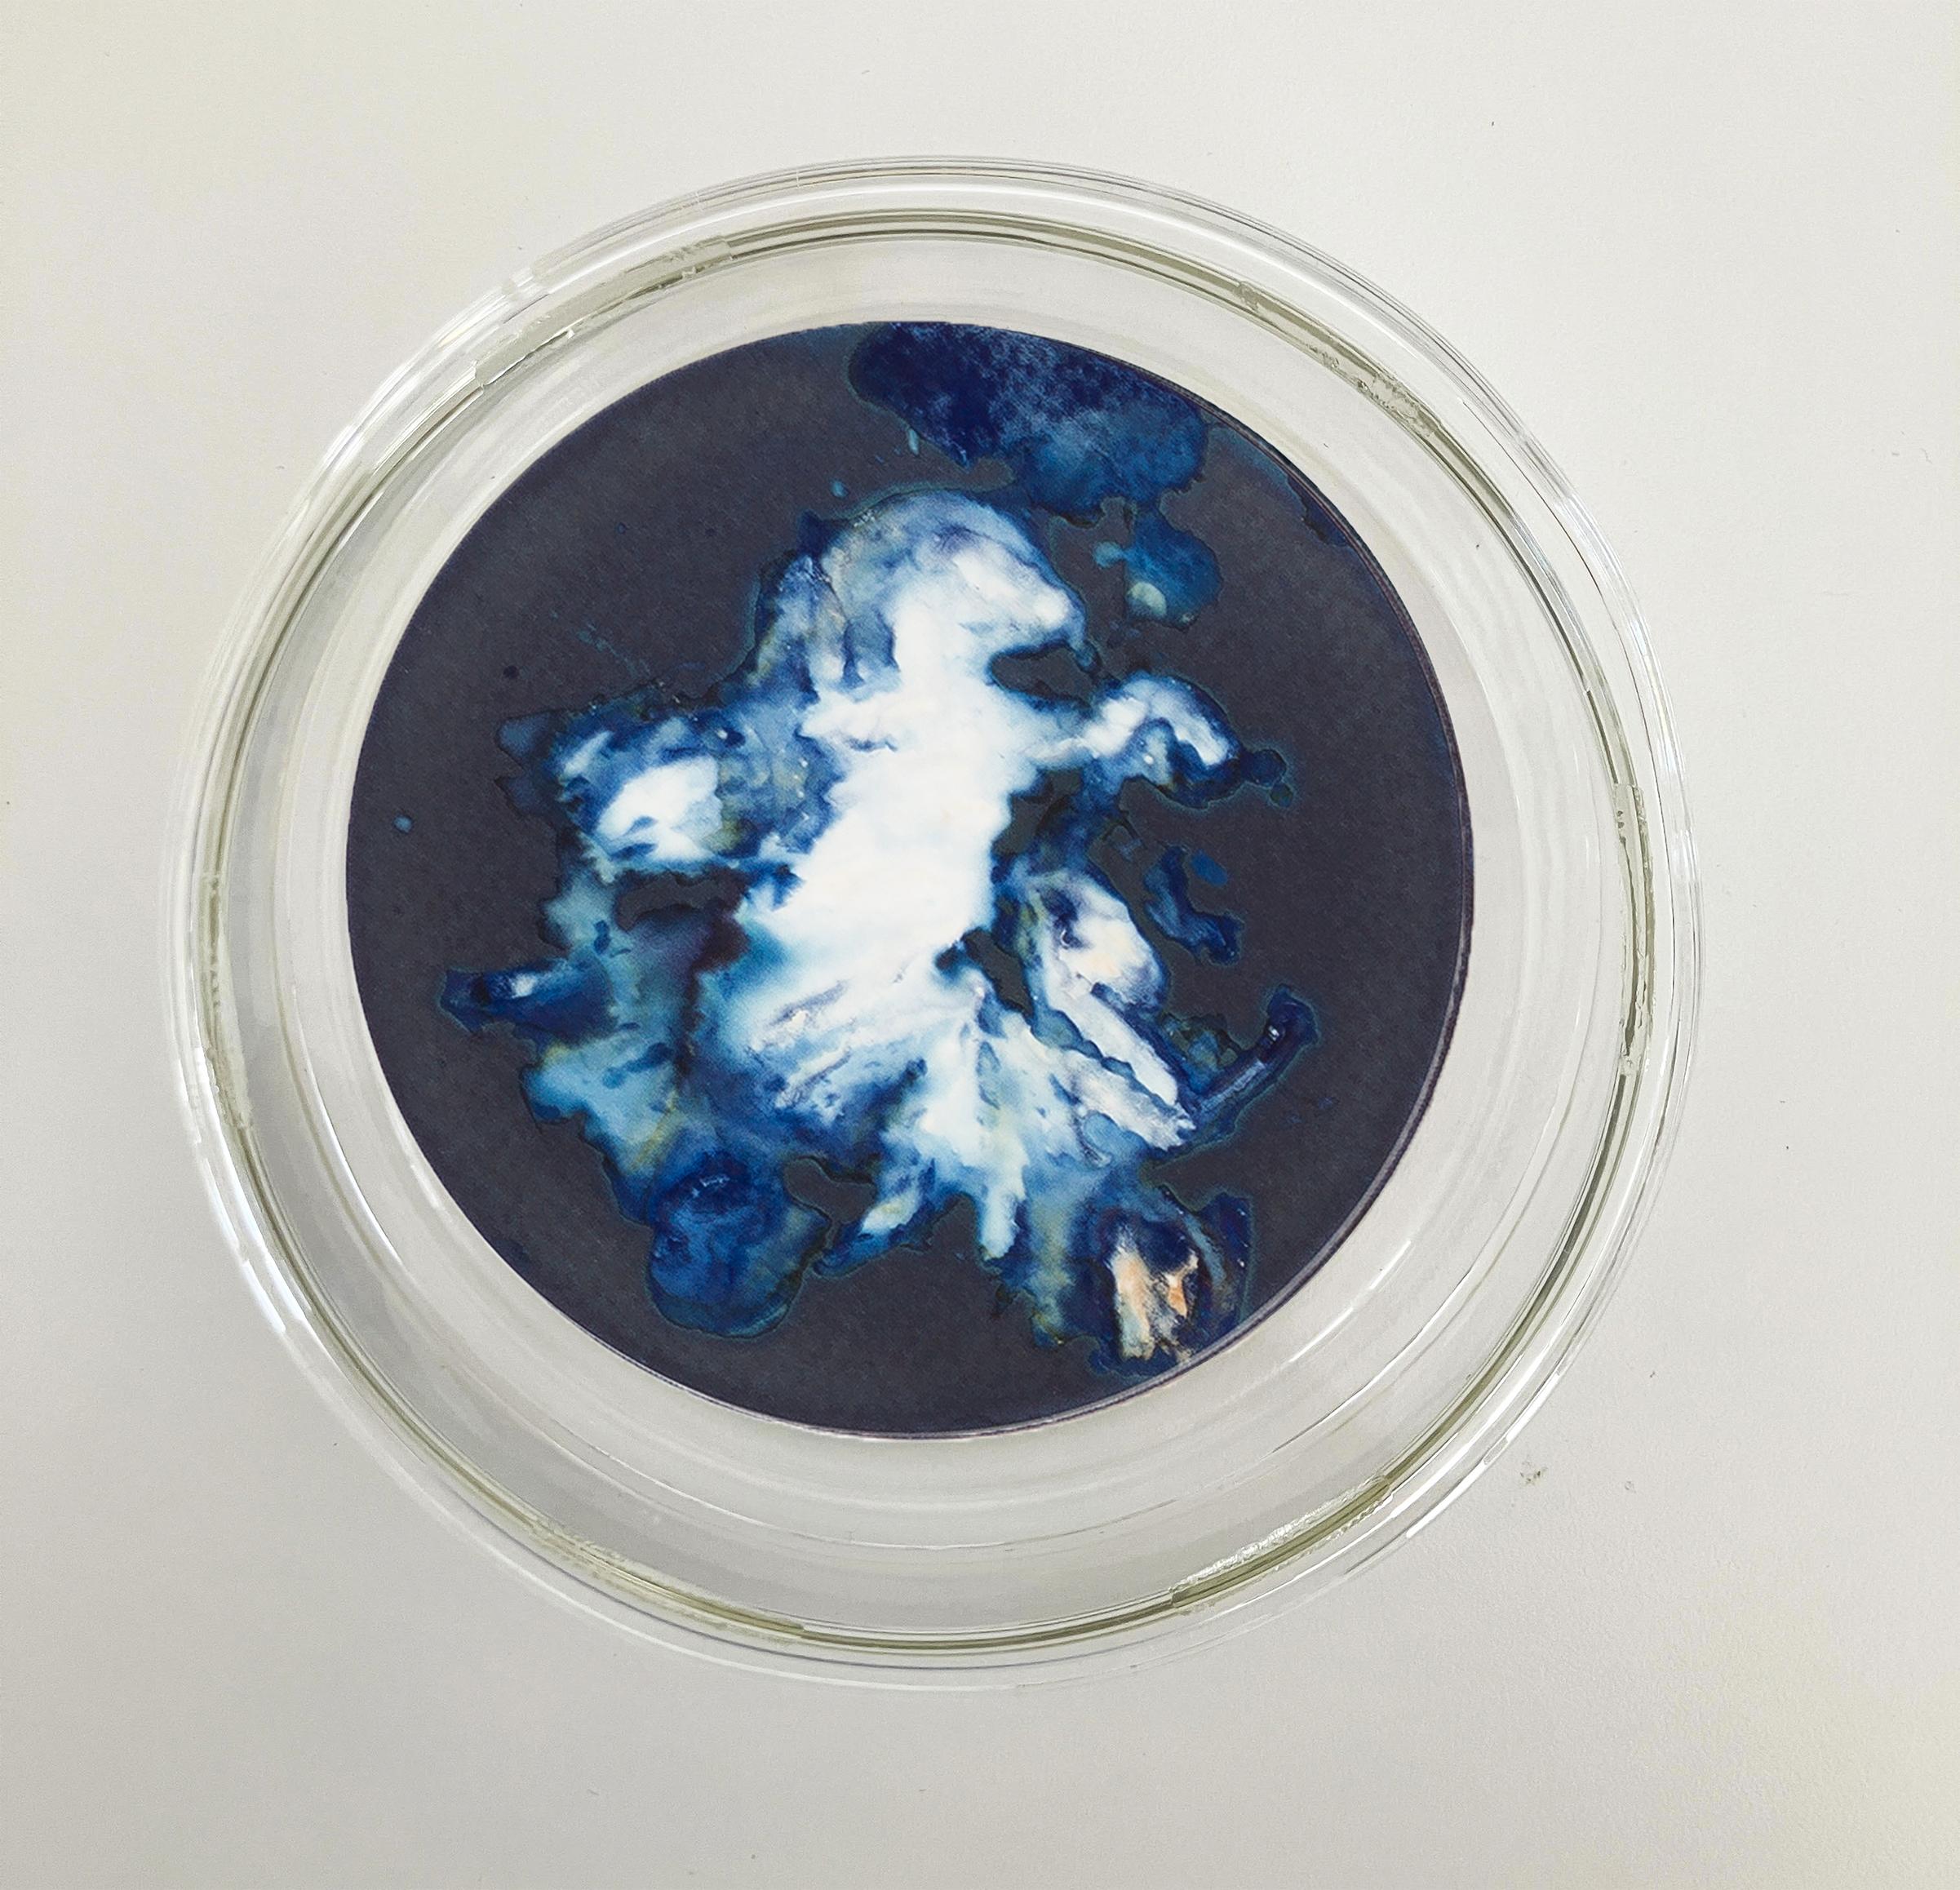 Algas 11, 22 y 67. Cyanotype photograhs mounted in high resistance glass dish For Sale 1